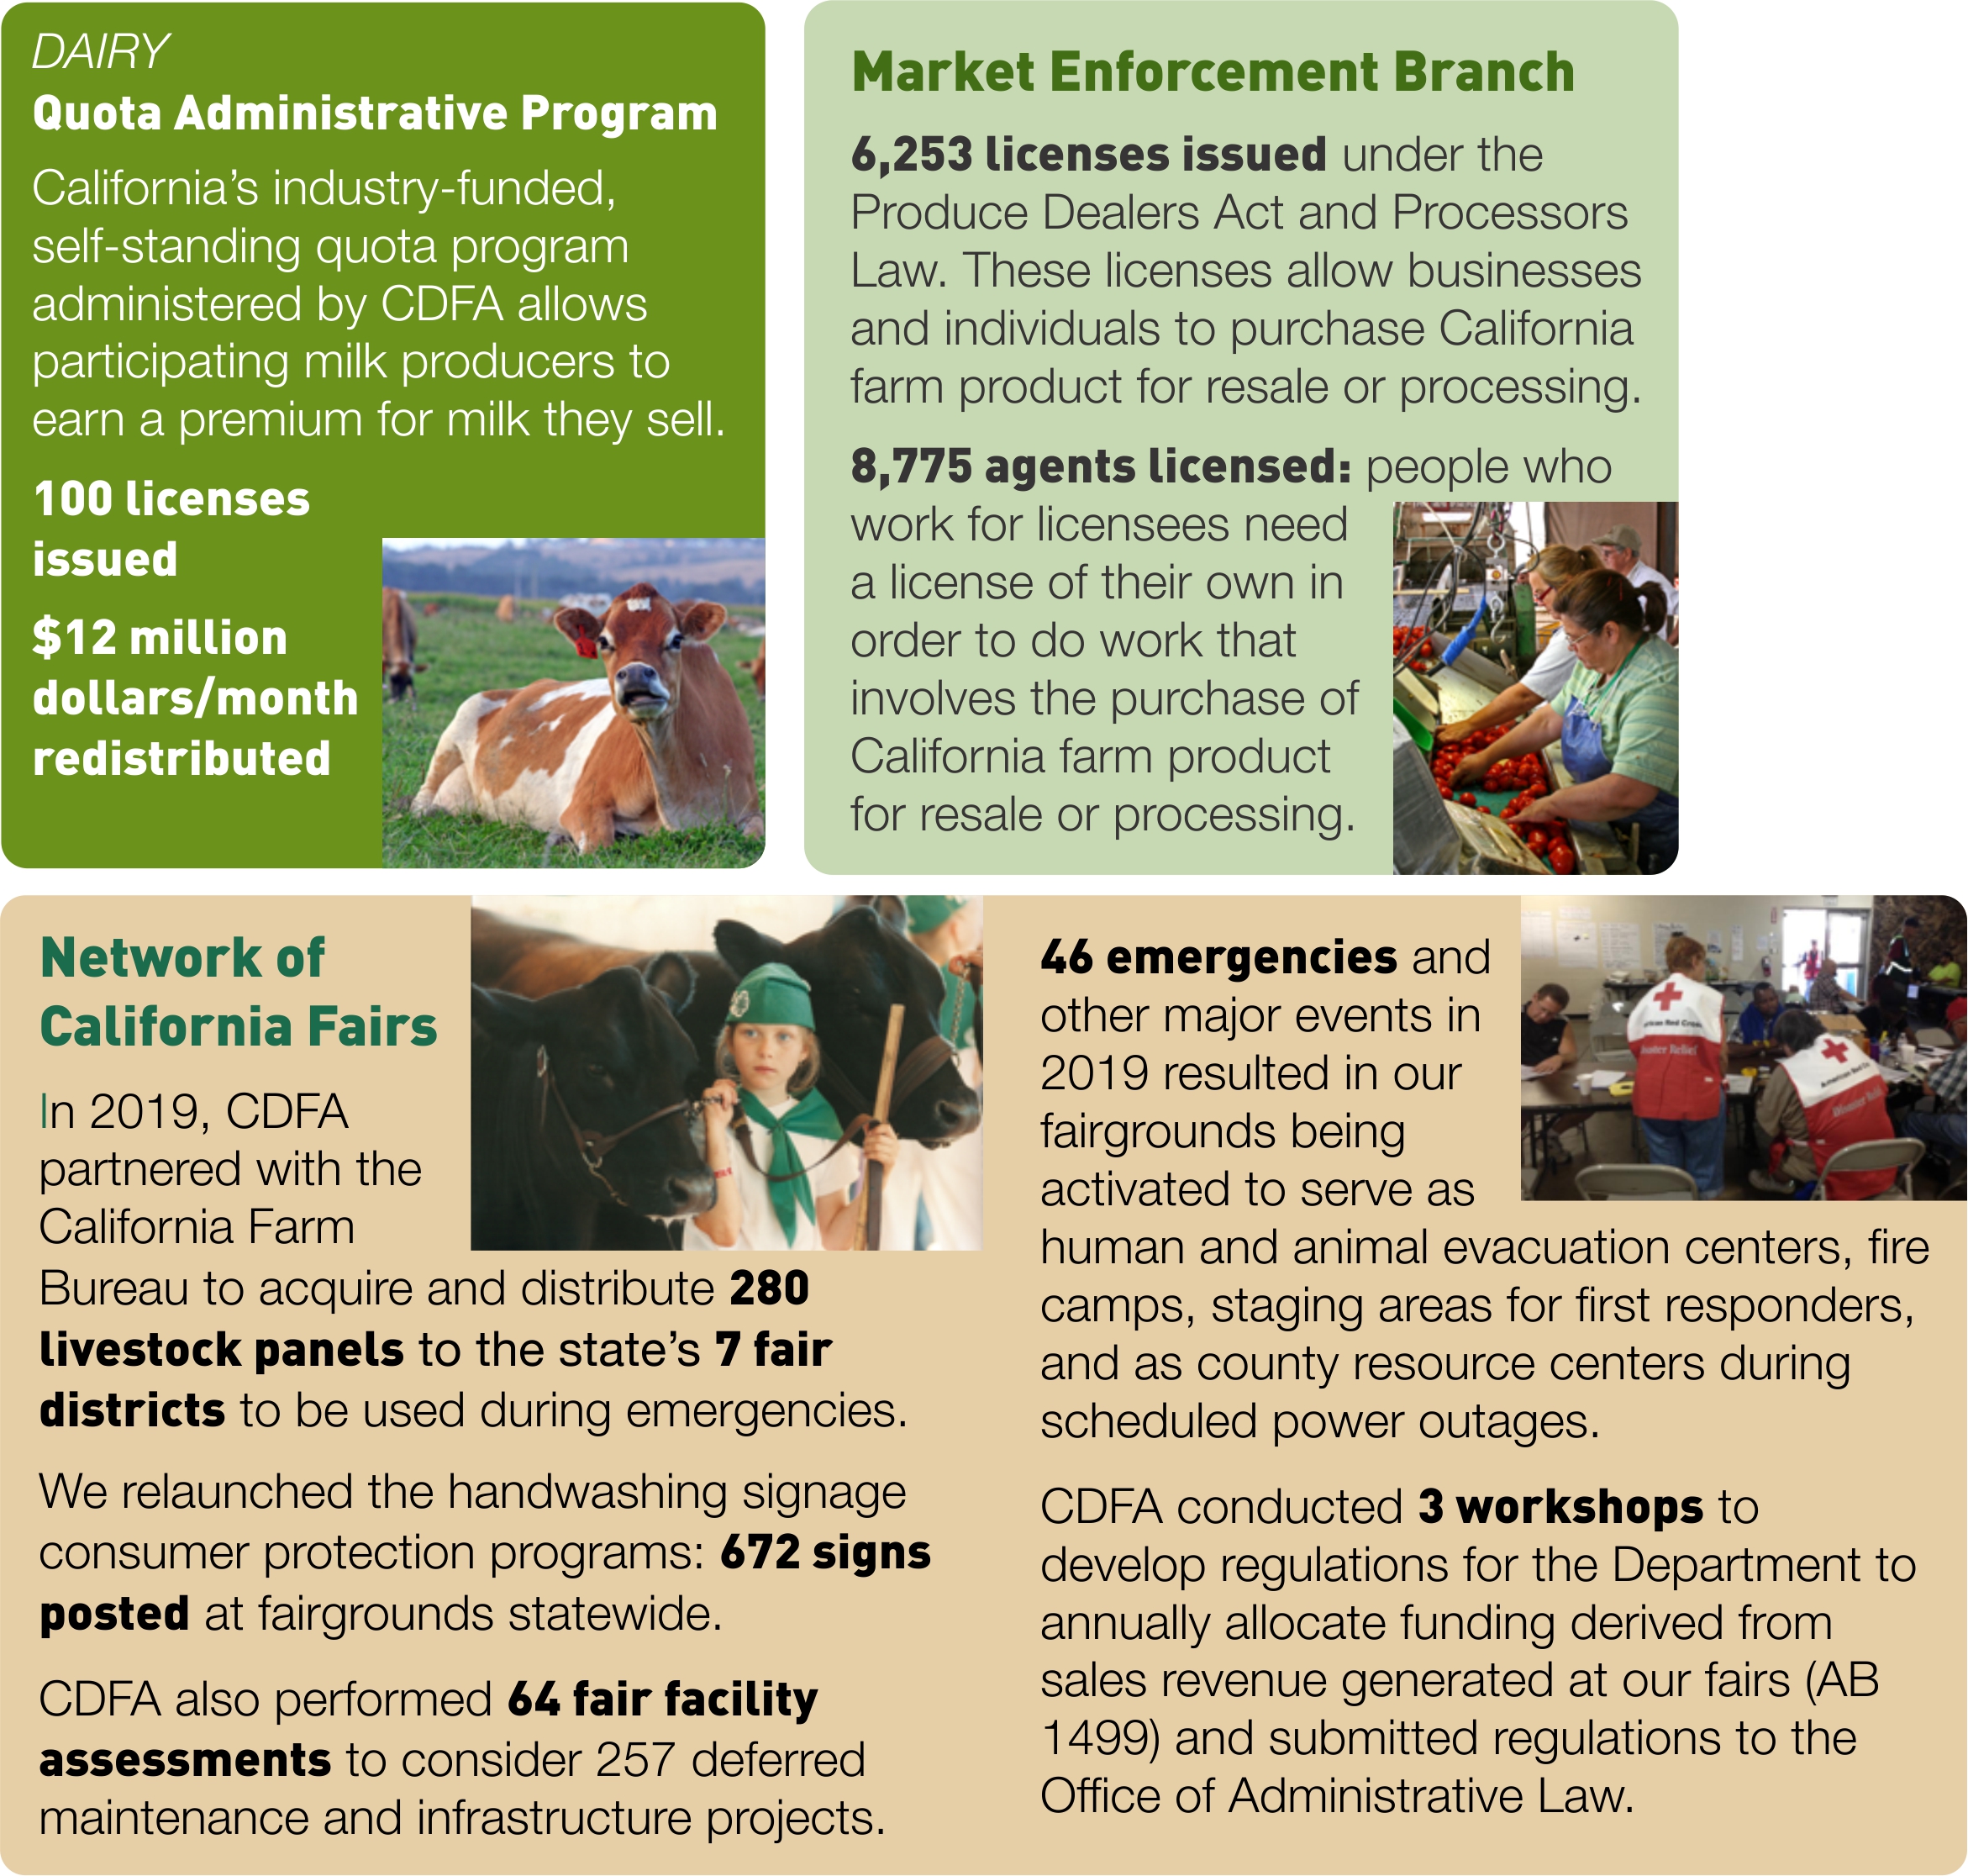 Infographic with details about CDFA's dairy-related Quota Administrative Program, licensing activities of the Market Enforcement Branch, and projects at the Network of California Fairs